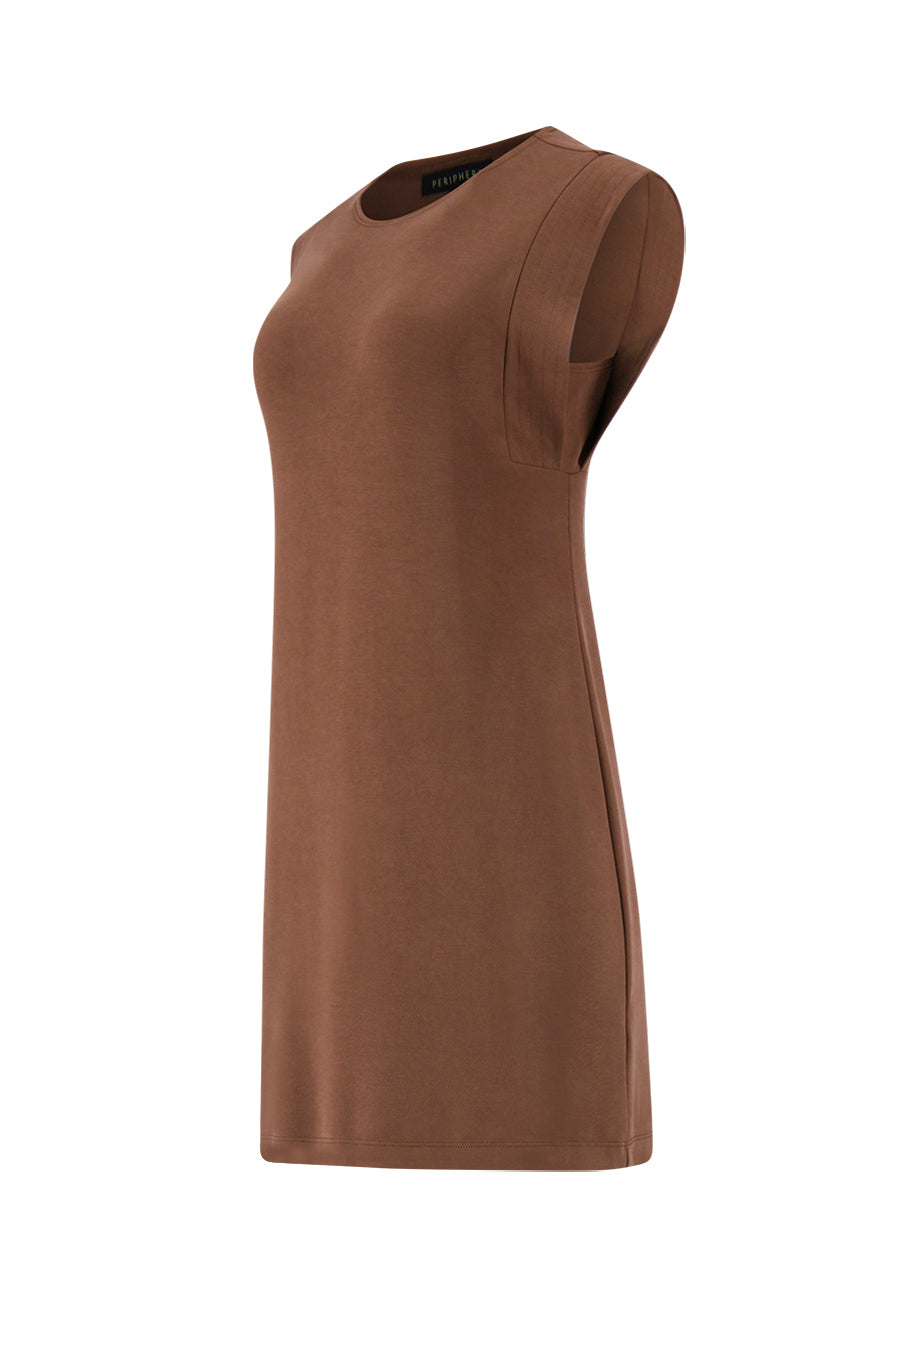 Dignity Dress in Cocoa - PERIPHERY